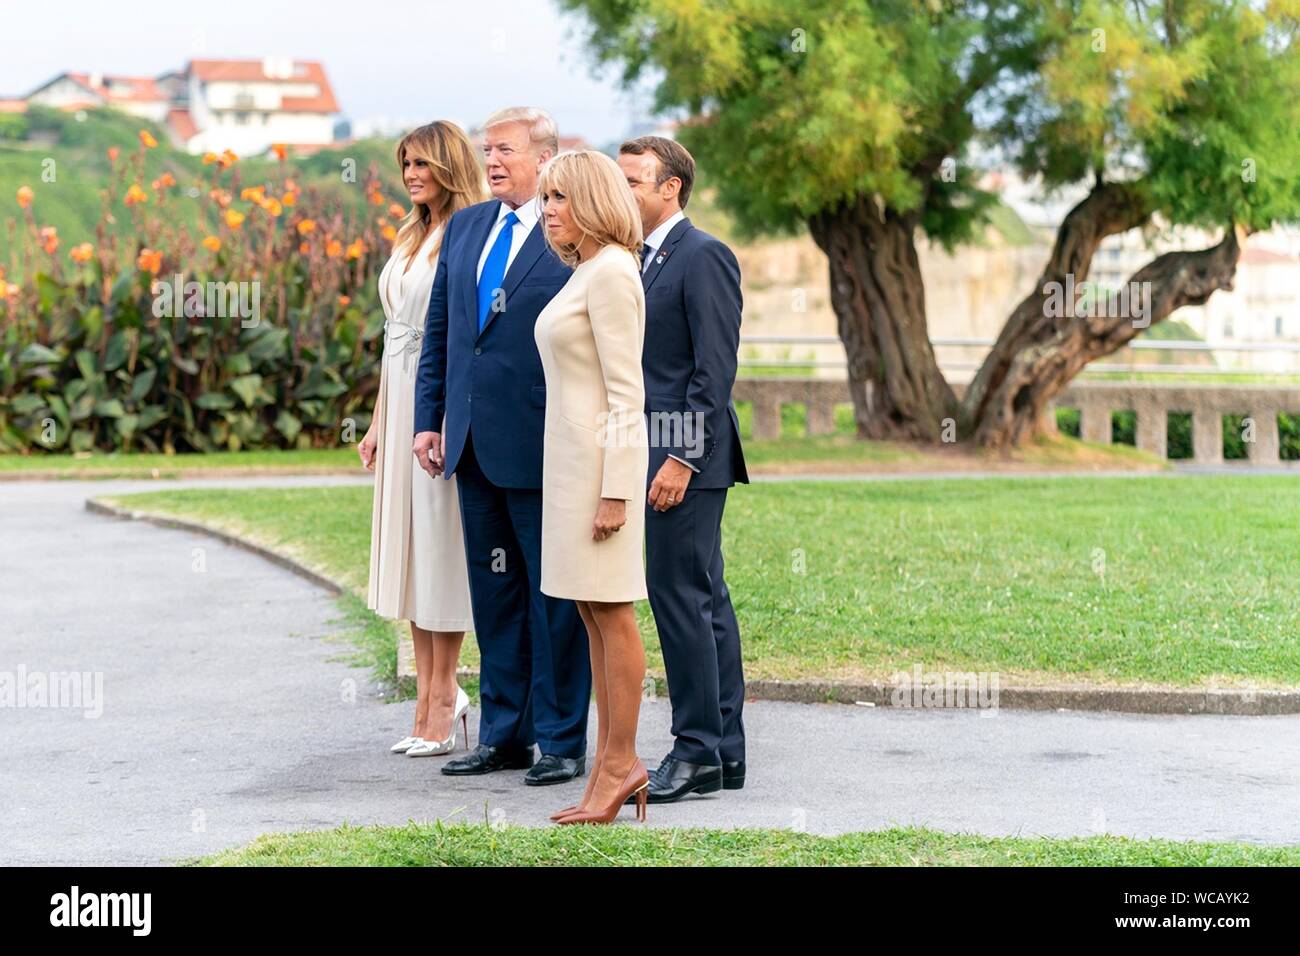 U.S. President Donald Trump and French President Emmanuel Macron pose together on arrival to the G7 Leaders’ Dinner at the Biarritz Lighthouse August 24, 2019 in Biarritz, France. Standing from left to right are: U.S. First Lady Melania Trump, U.S. President Donald Trump, French President Emmanuel Macron and French First Lady Brigitte Macron. Stock Photo